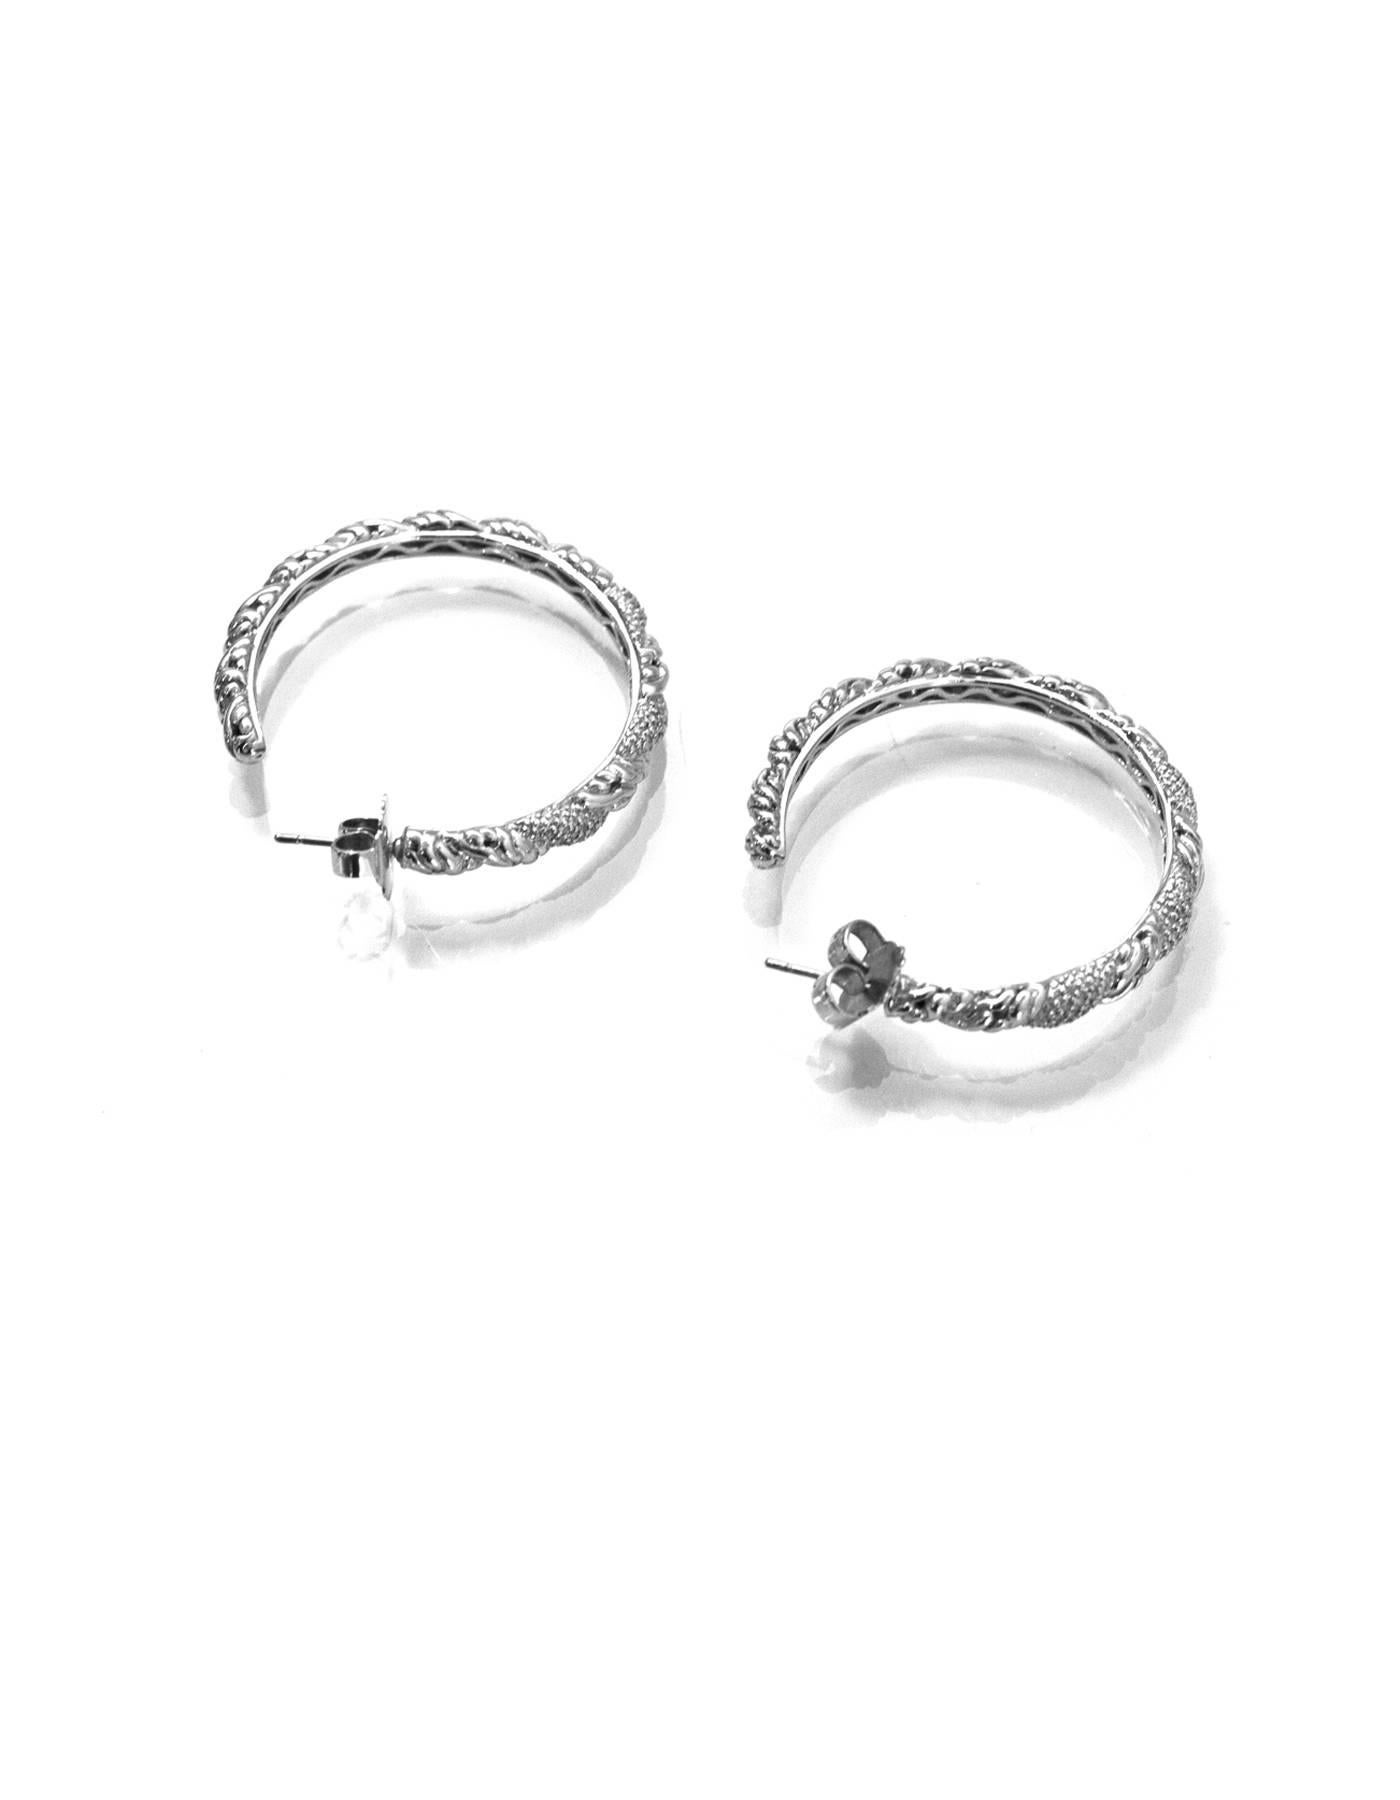 Women's John Hardy Sterling Silver and Pave Diamond Hoop Earrings with Dust Bag